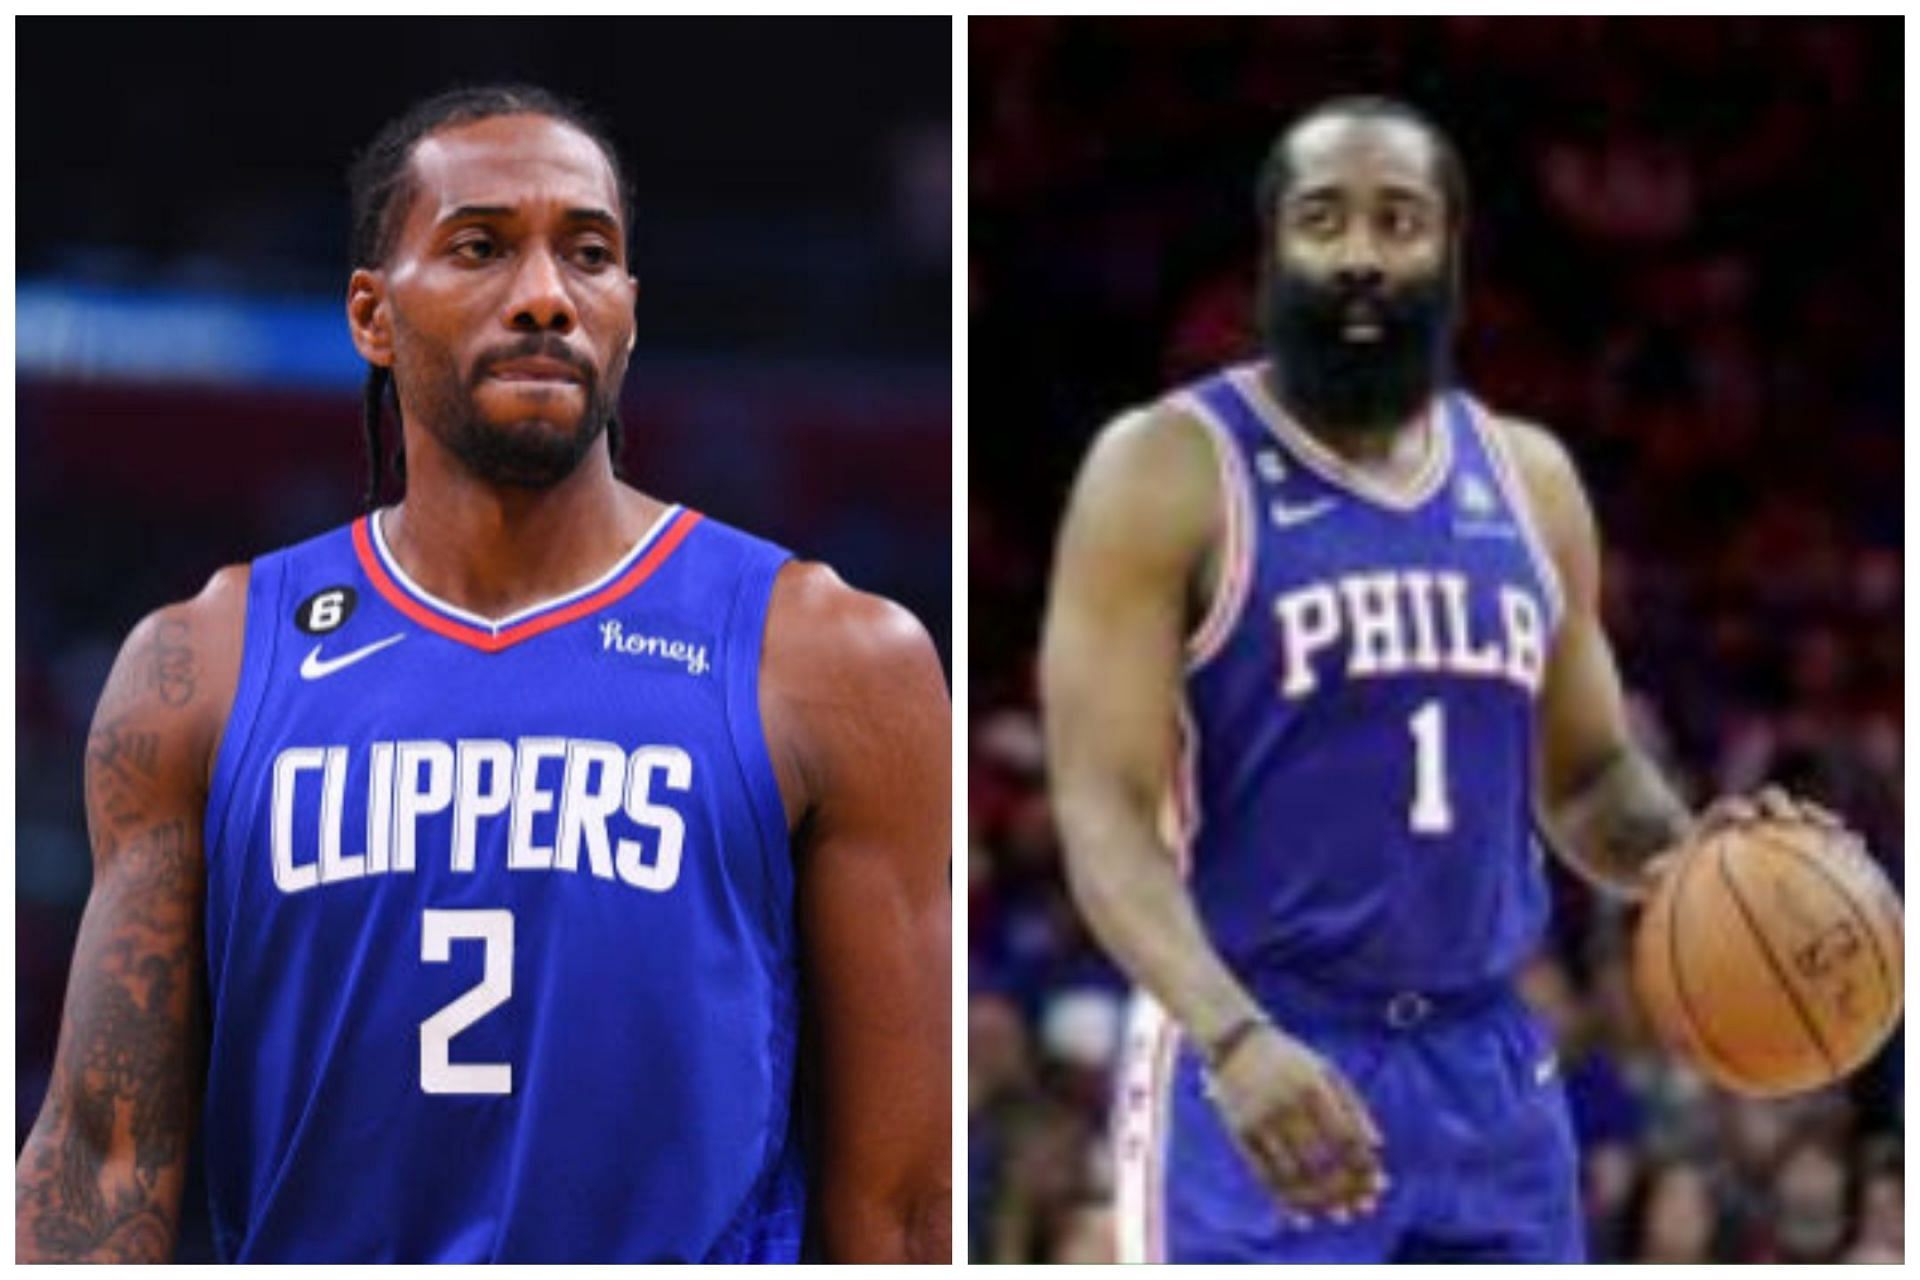 Kawhi Leonard (left) could sit out the game vs the Lakers on Wednesday, while James Harden (right) will make his LA Clippers debut early next week